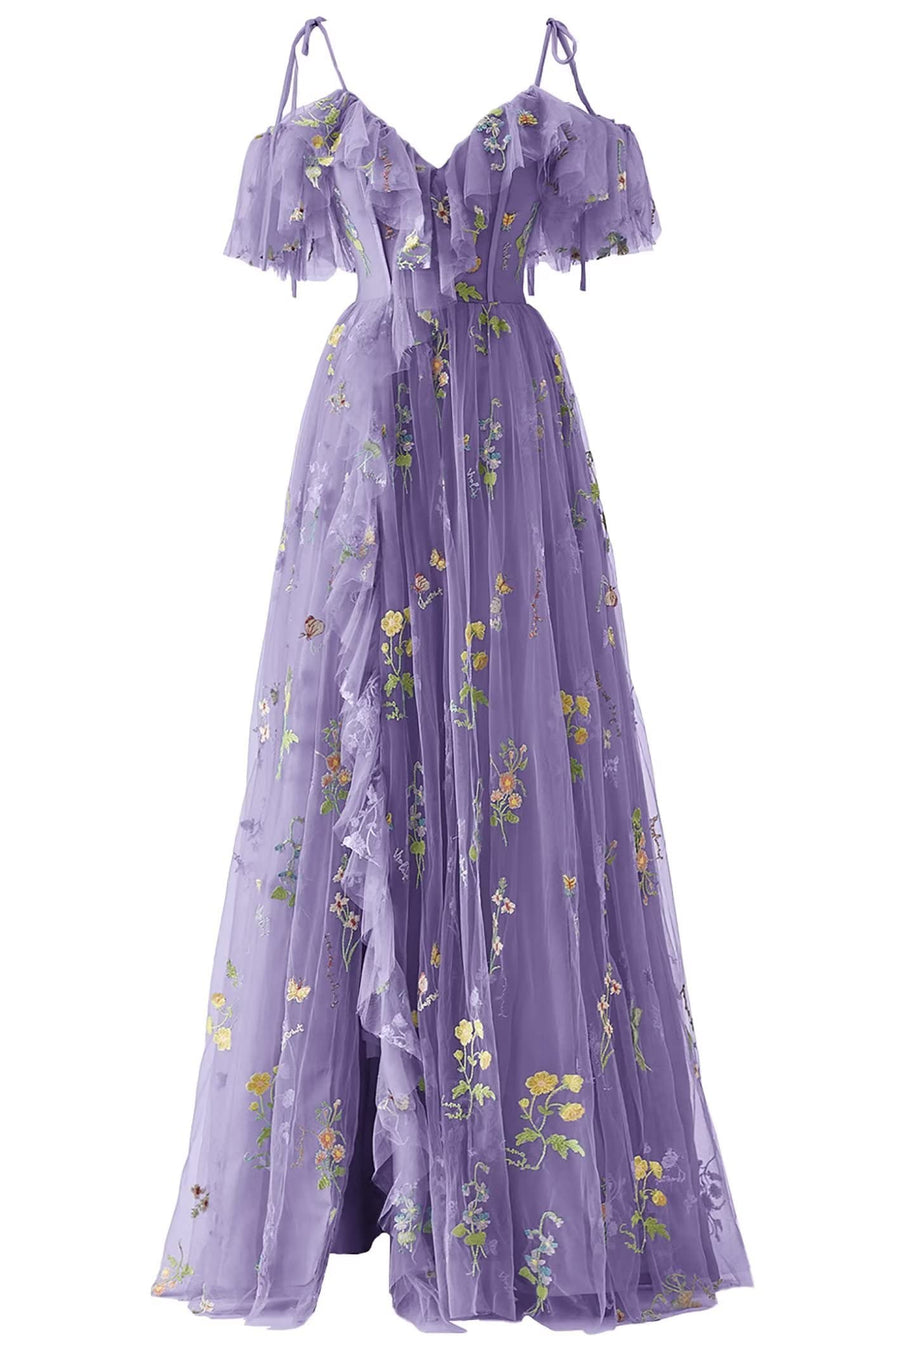 Lavender Off-the-Shoulder Embroidery Ruffled Long Prom Dress with Slit